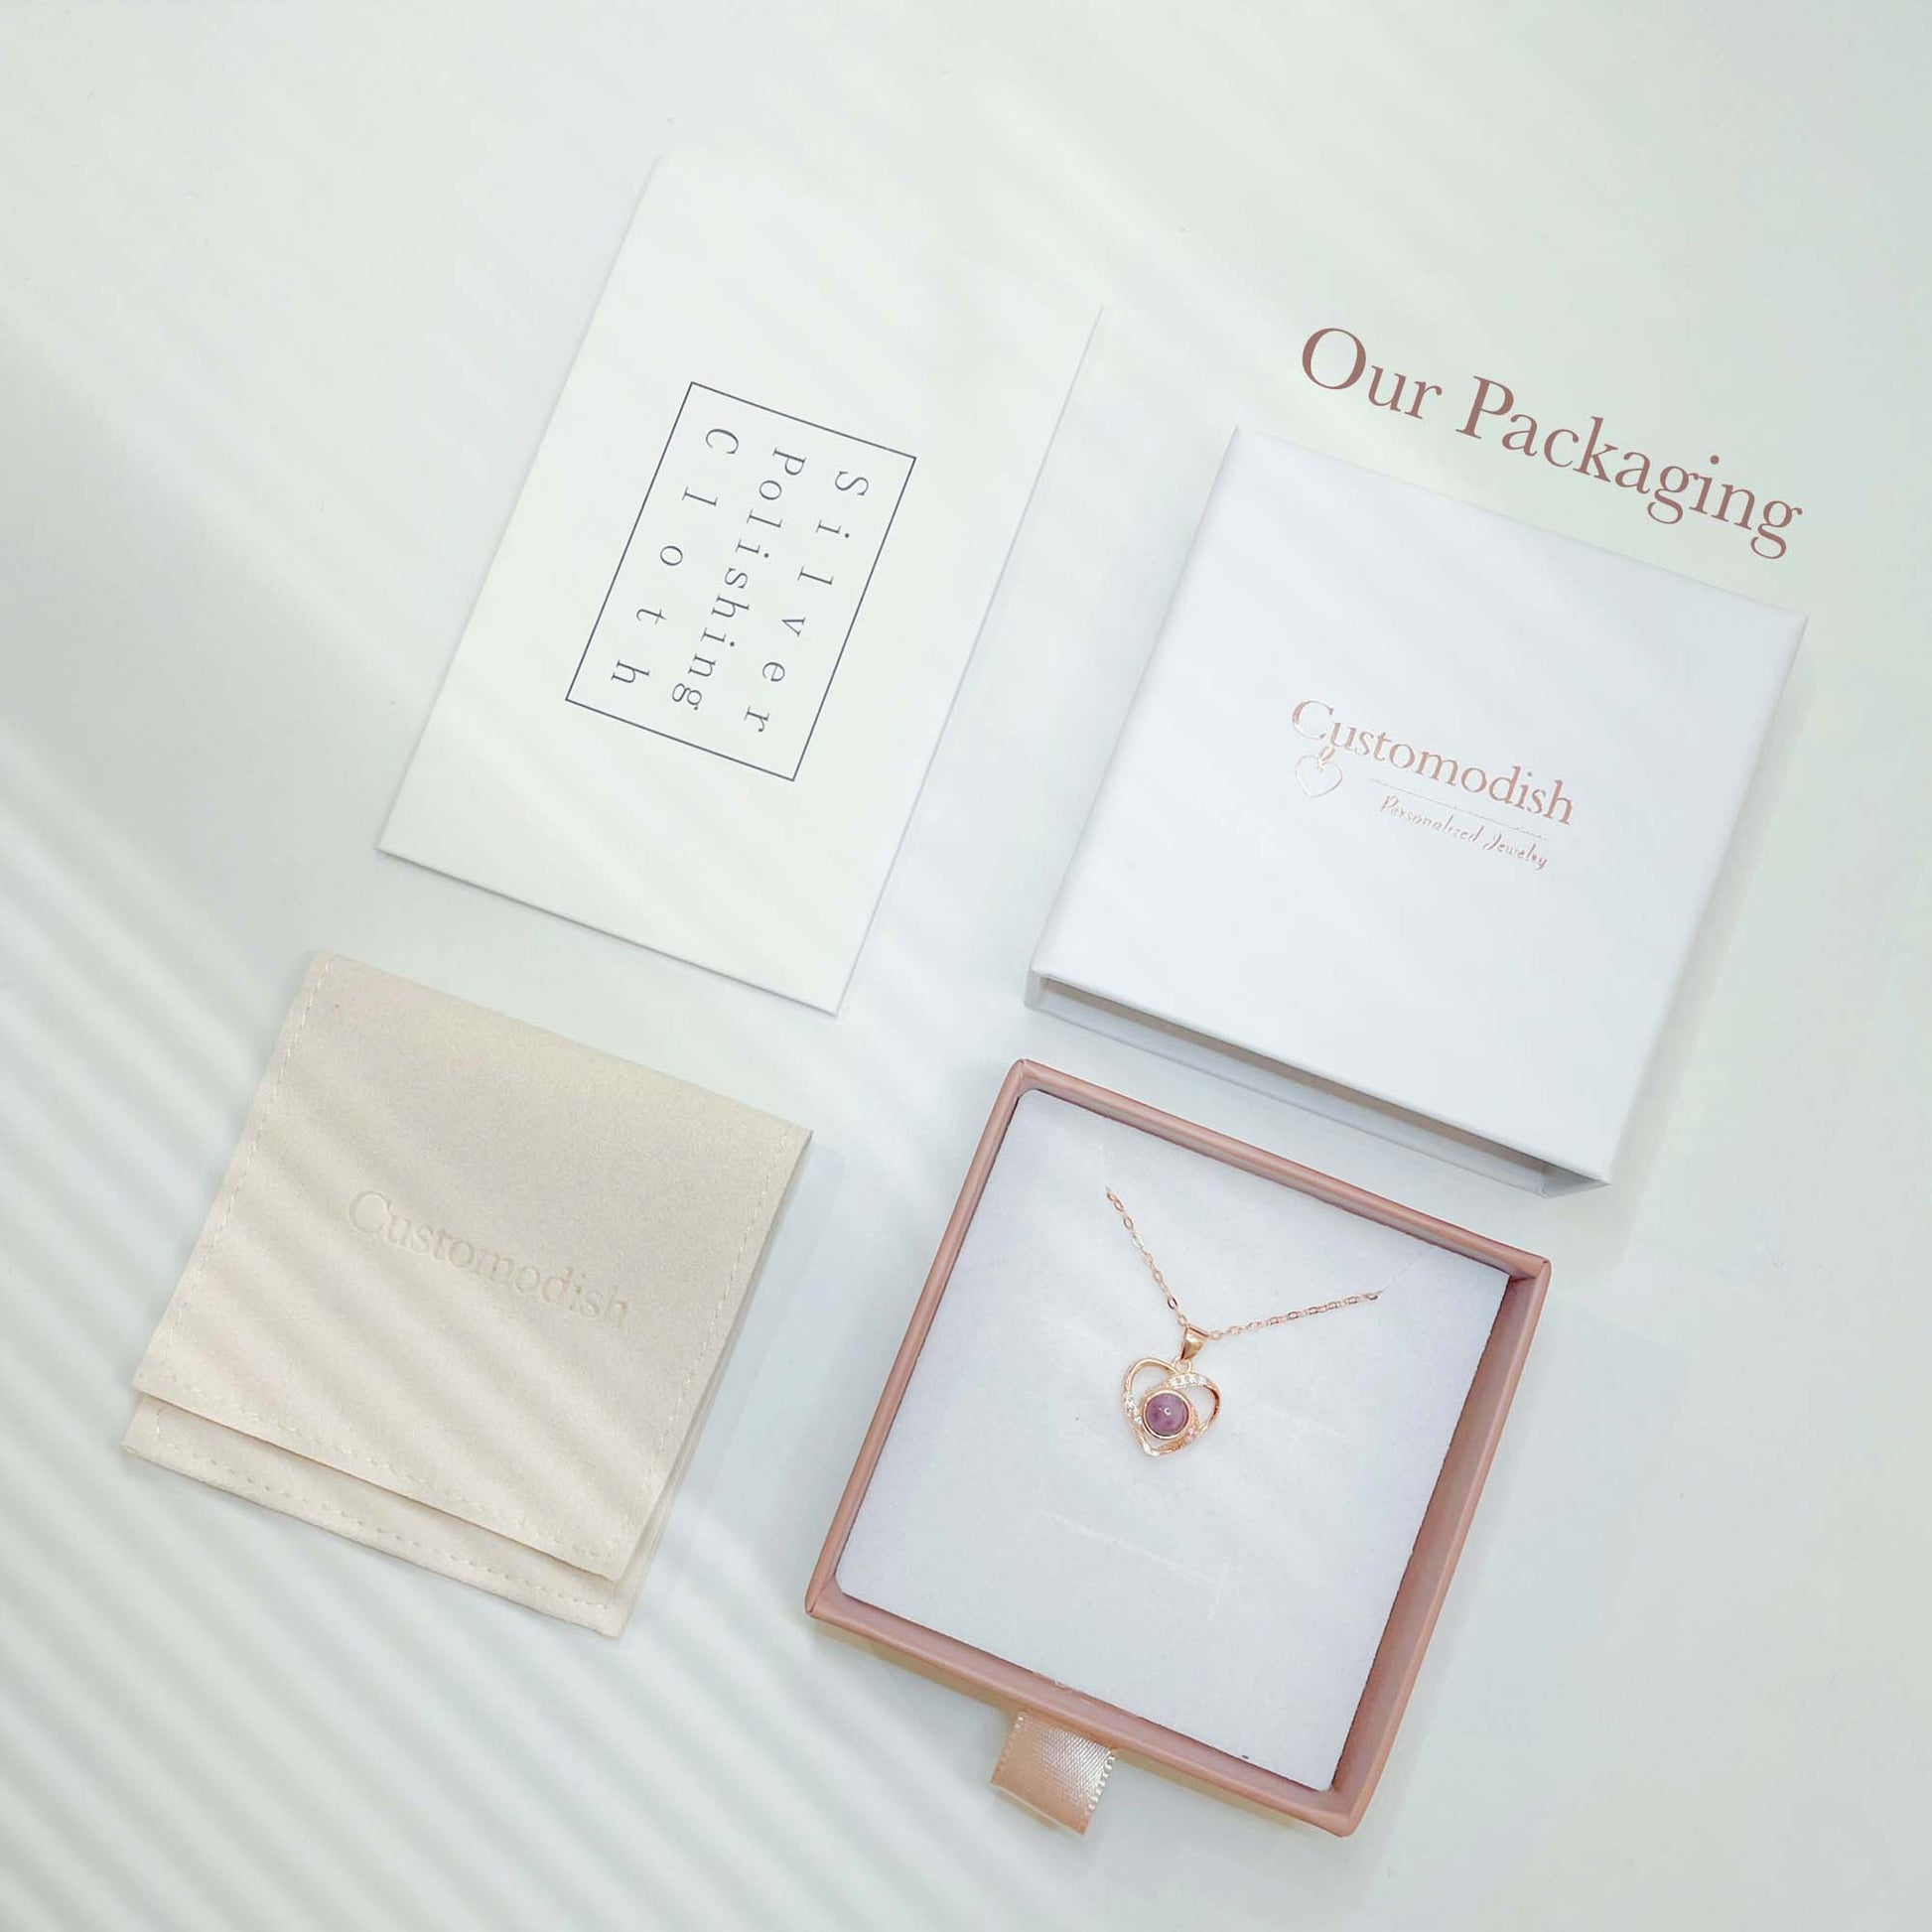 Your projection necklace will be beautifully wrapped with a jewelry box!